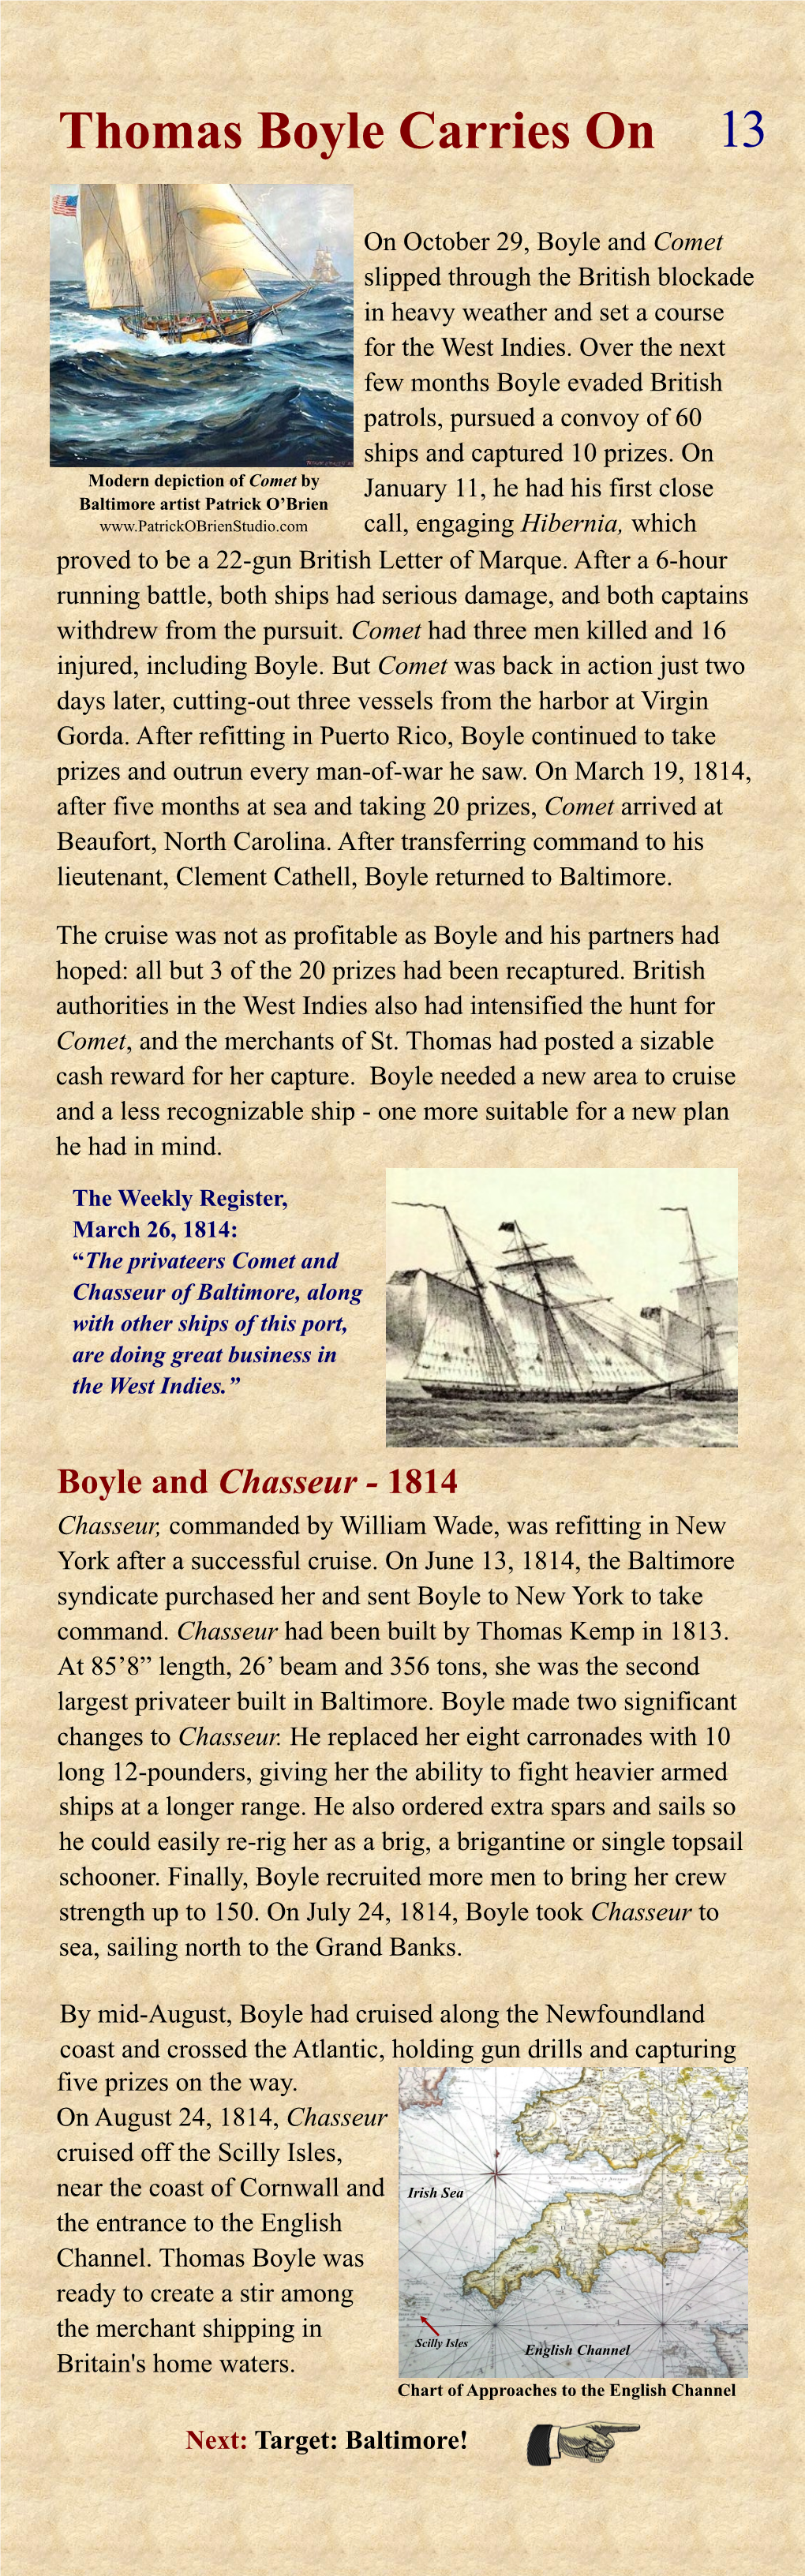 Boyle and Chasseur - 1814 Chasseur, Commanded by William Wade, Was Refitting in New York After a Successful Cruise